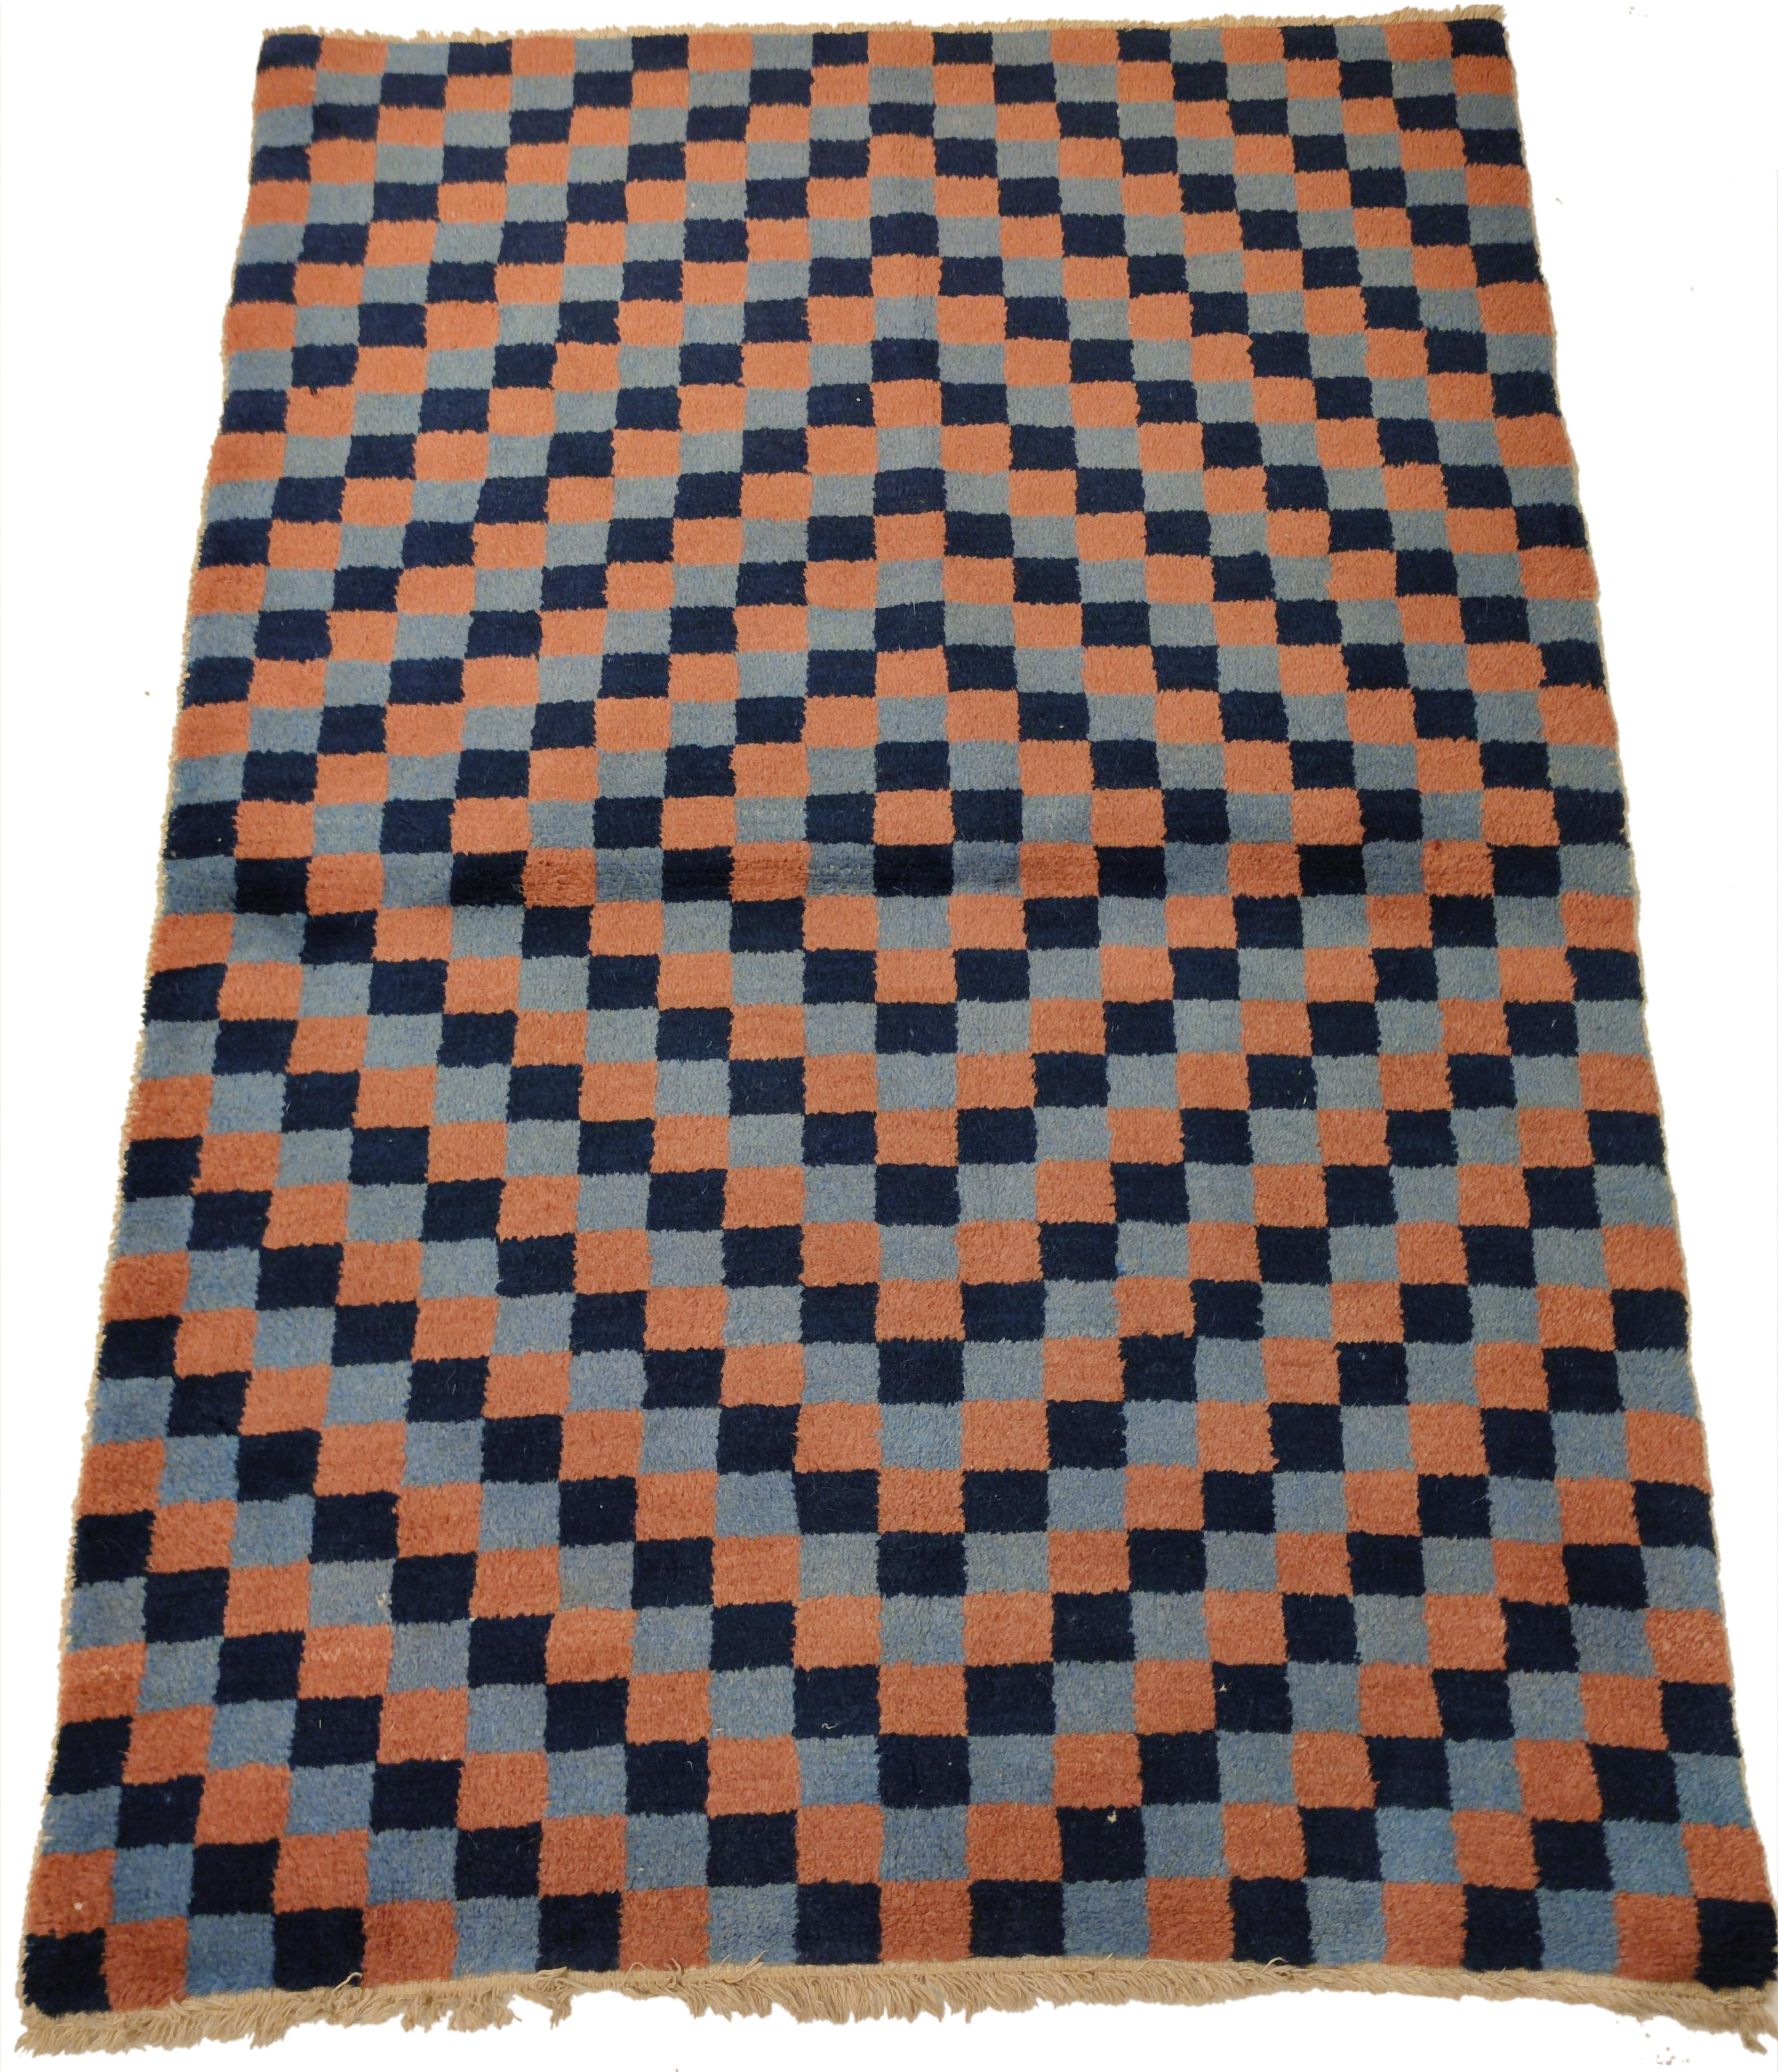 Woven in the khaden format, checkerboard rugs were commissioned in Tibet for monastic use. These are typically woven in two contrasting colours, and more rarely in three colours, like in the present example. These are arranged here in such a way as